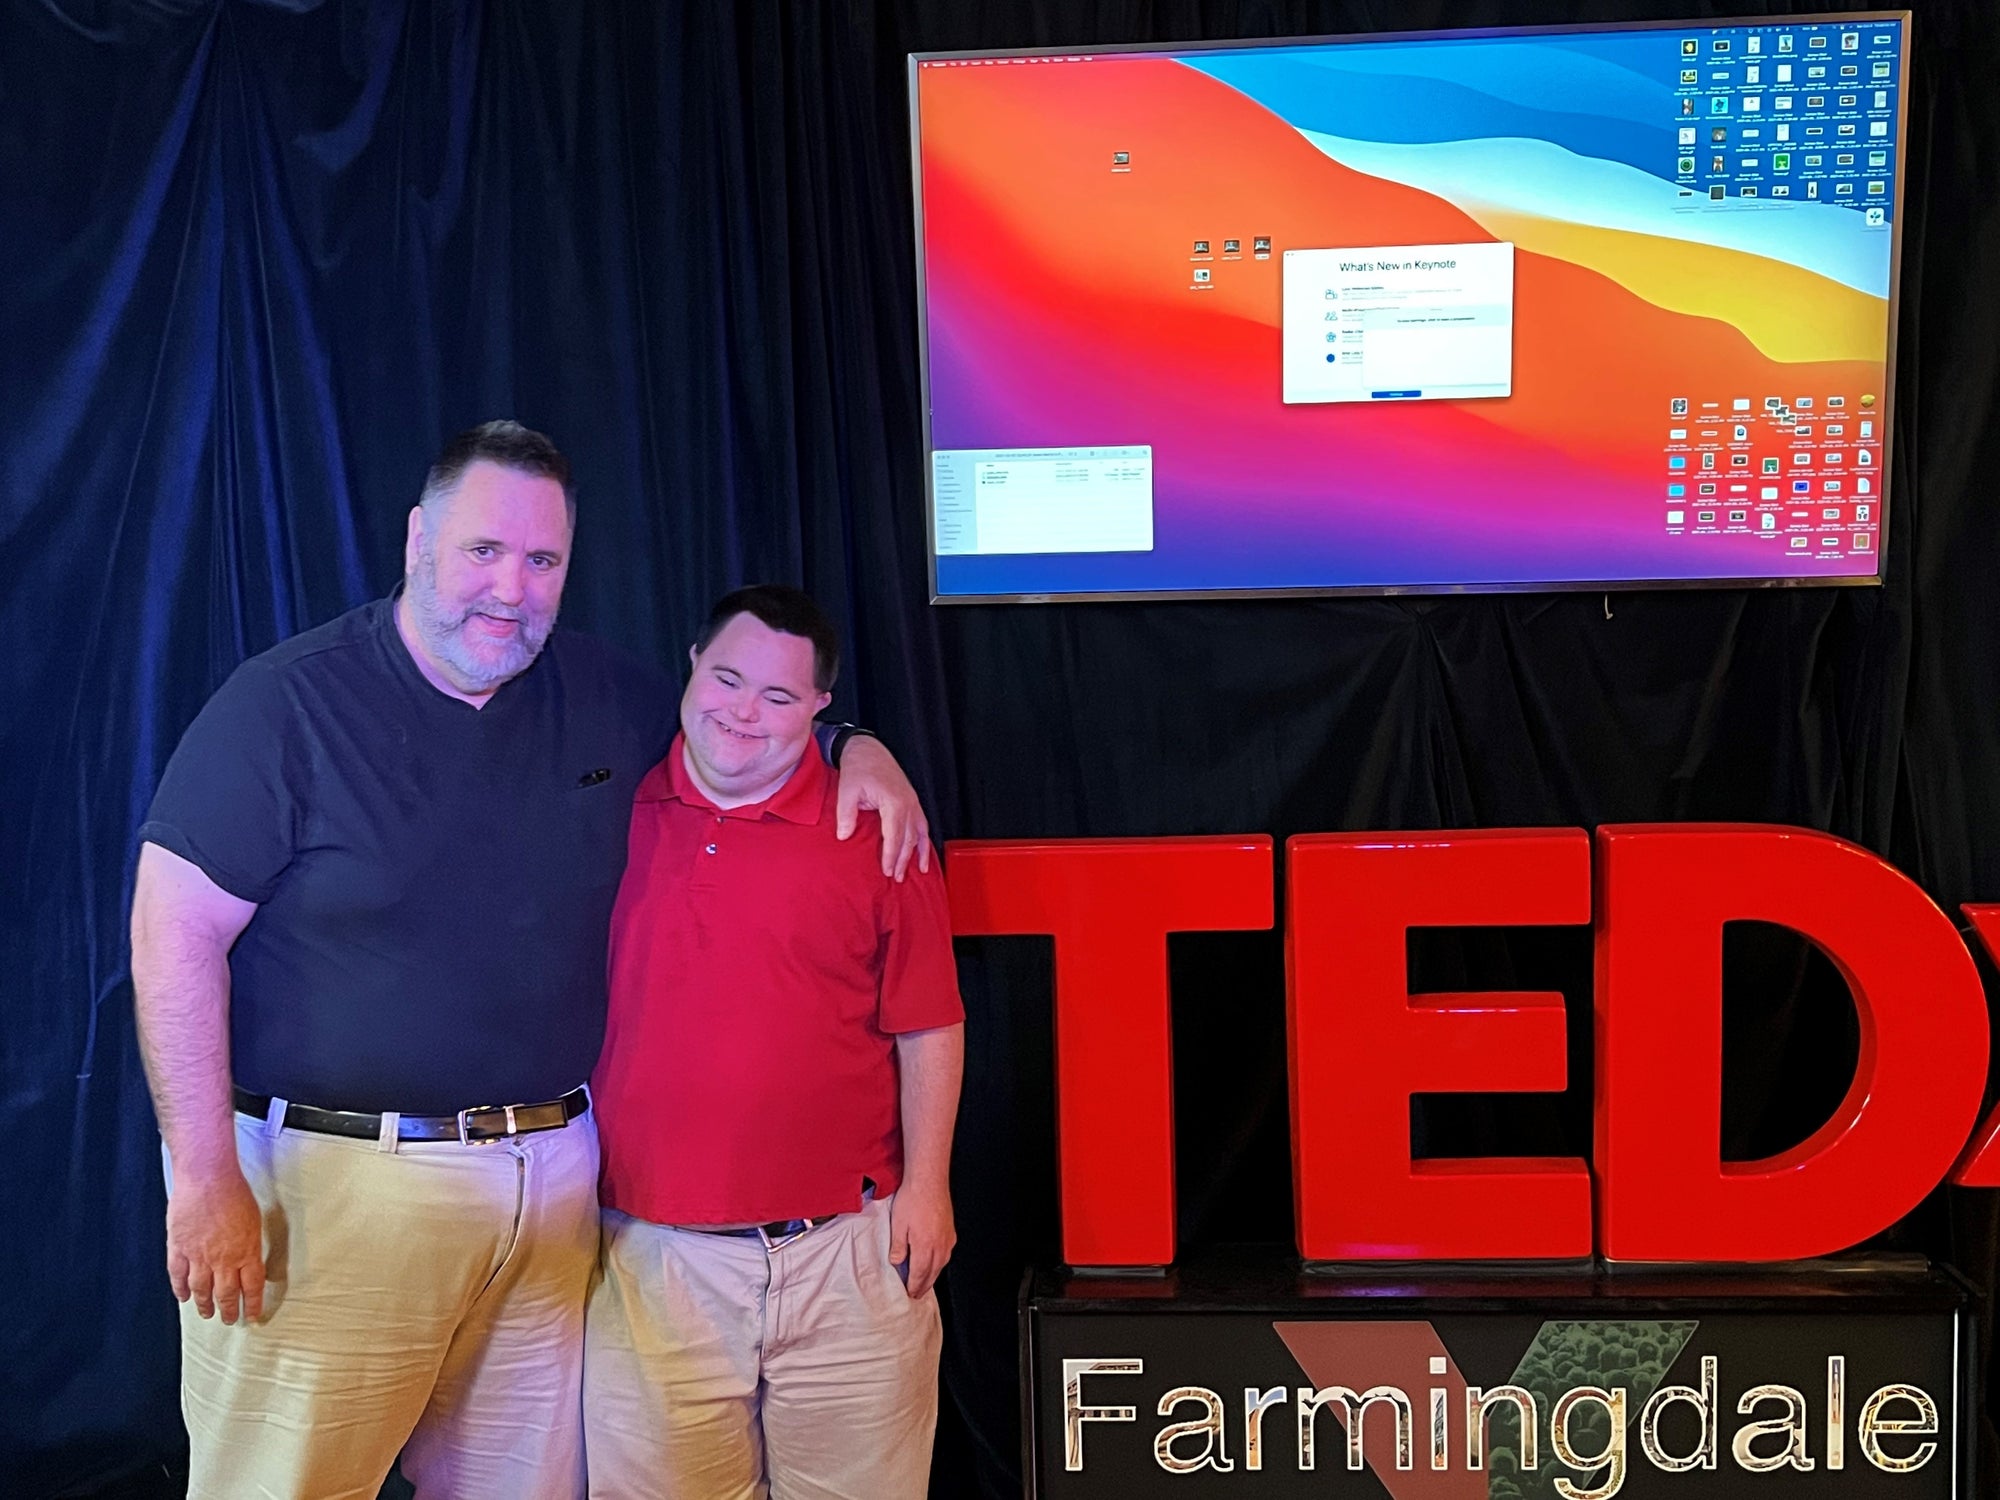 John and Mark X. Cronin Give TEDx Talk on the Power of People with Differing Abilities